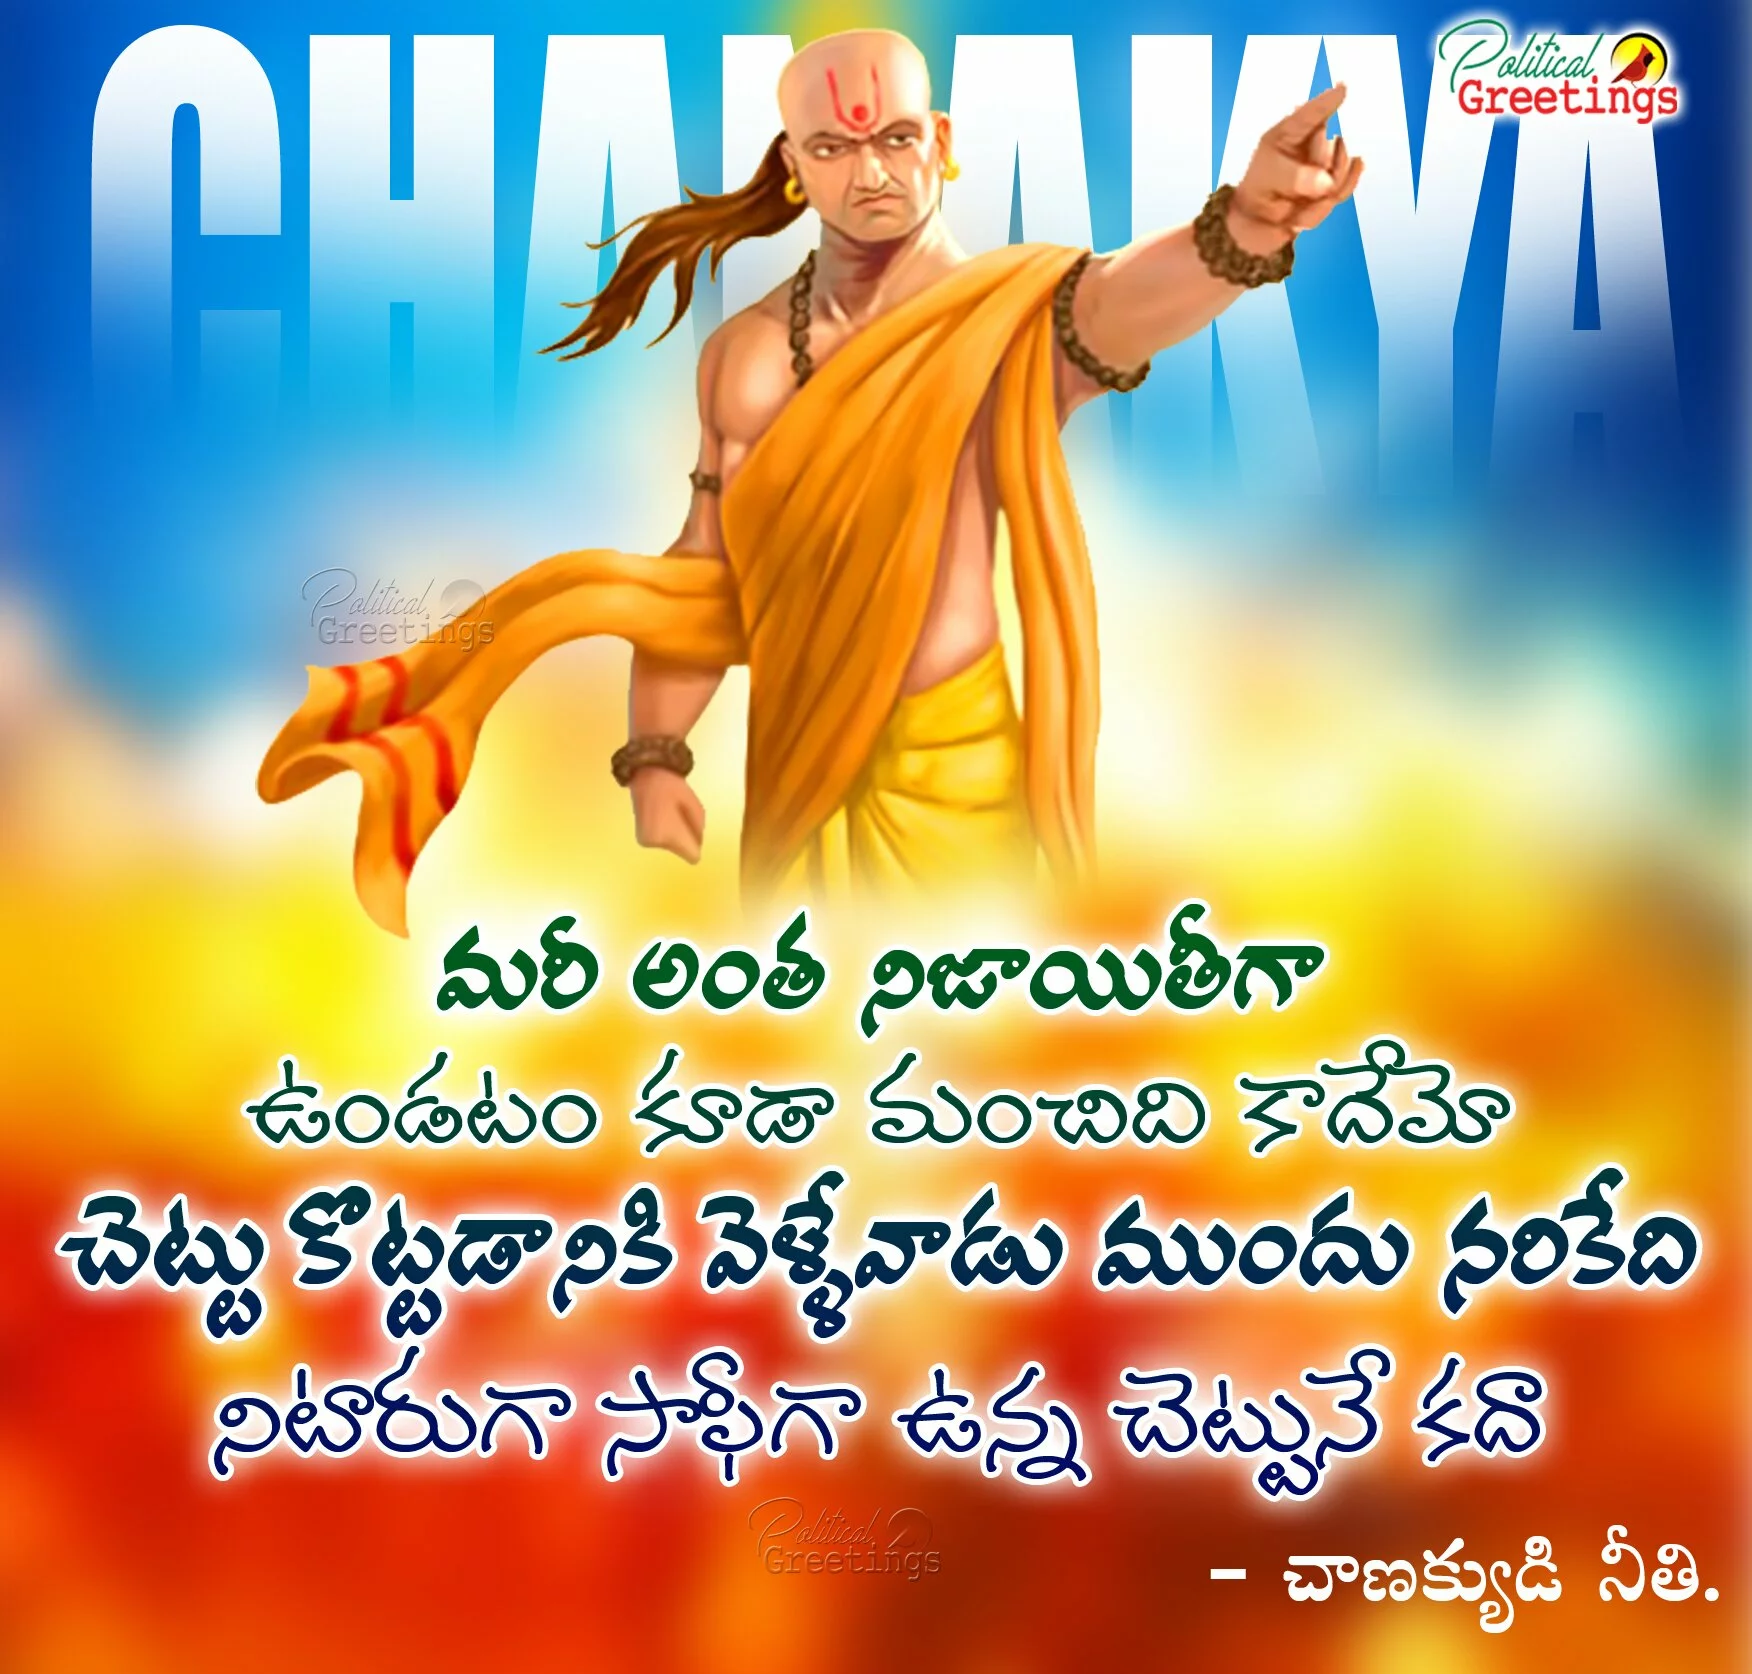 Famous Chanakya Quotes sms messages in Telugu with images